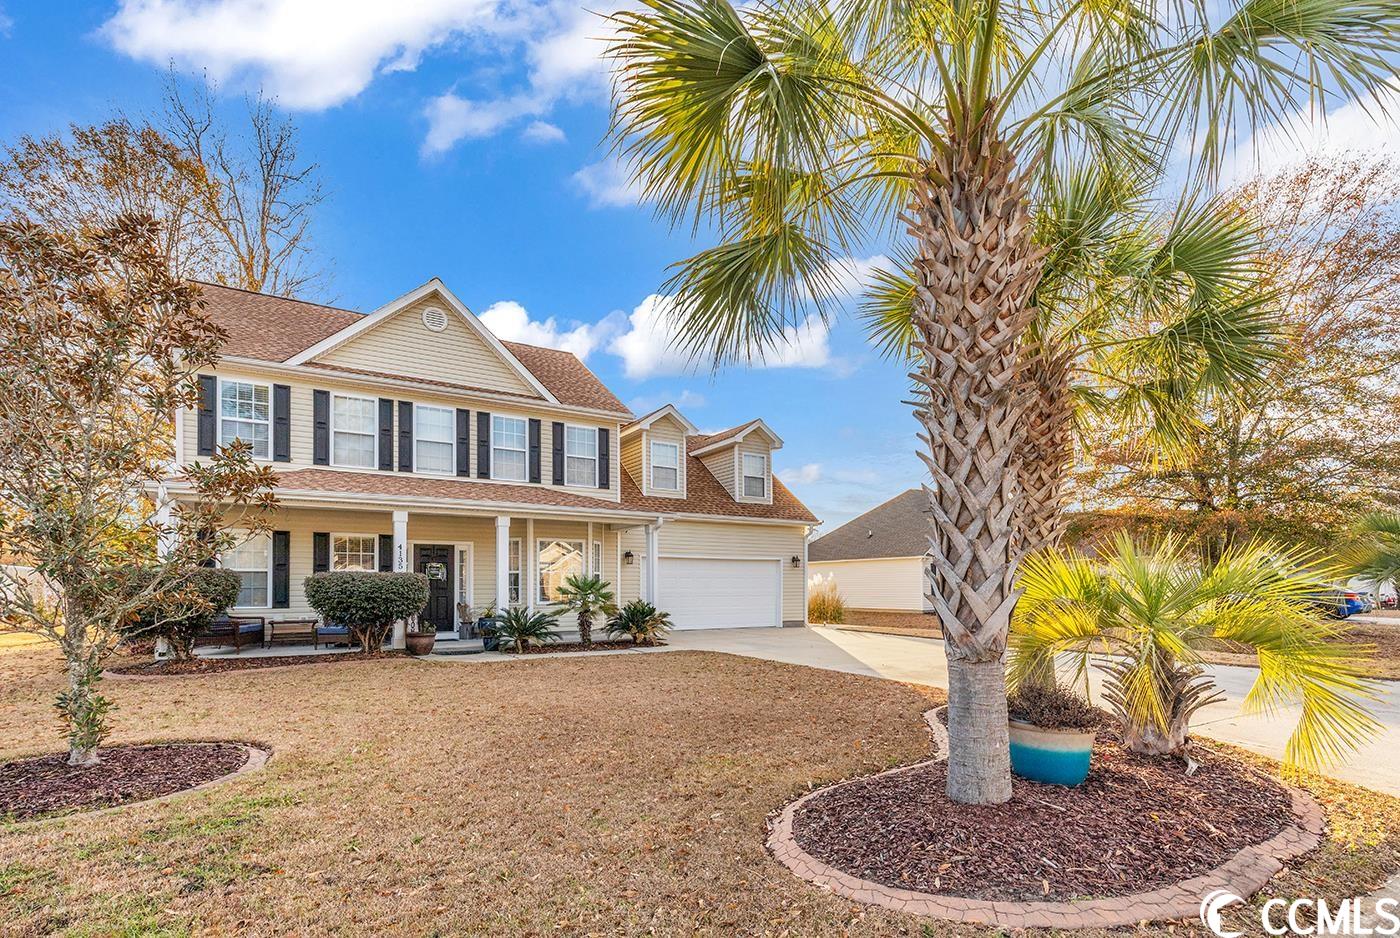 4135 Steeple Chase Dr. Myrtle Beach, SC 29588